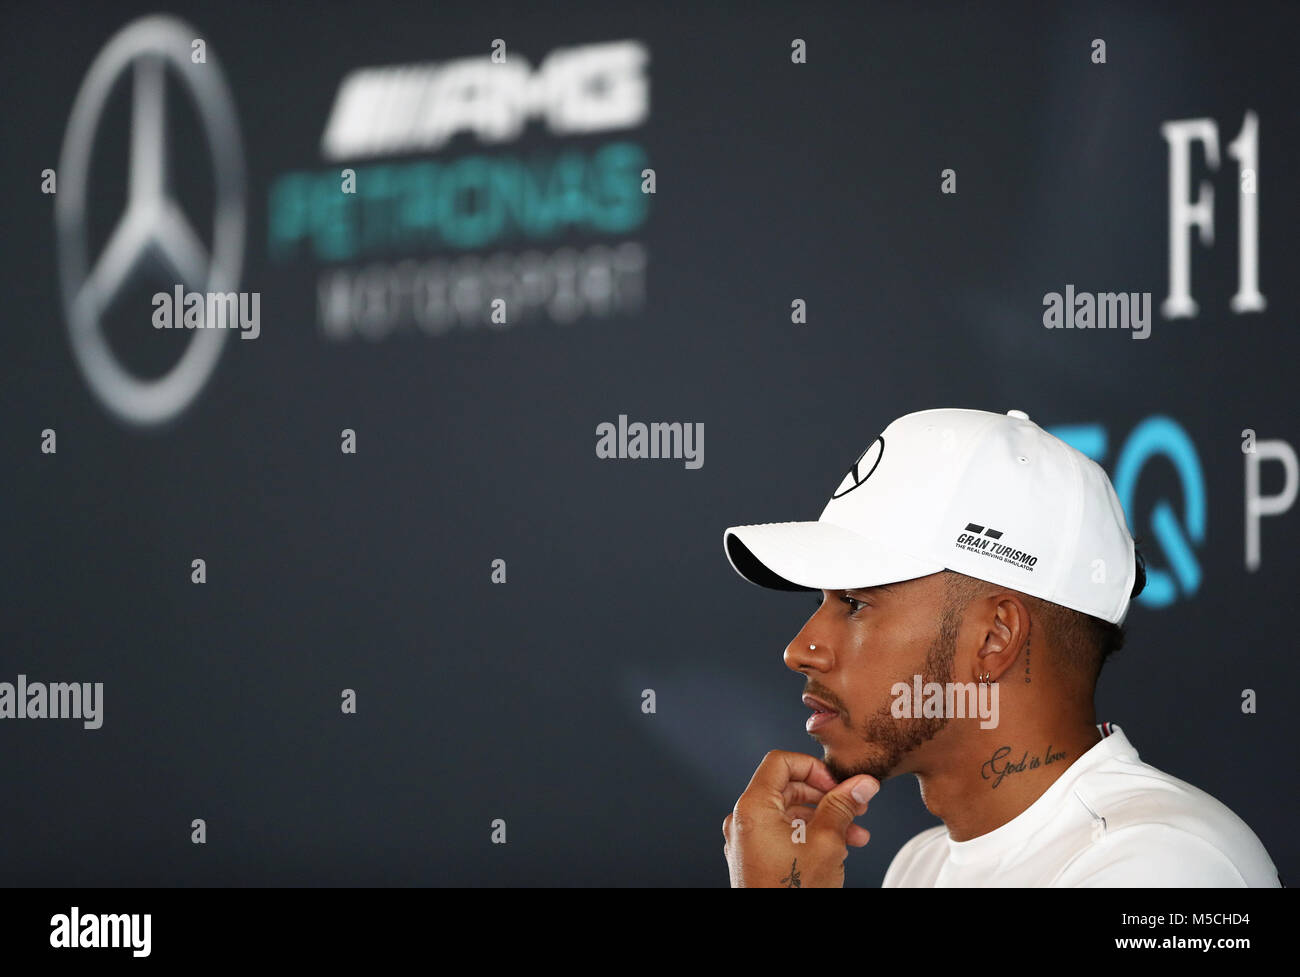 Mercedes driver Lewis Hamilton attends a press conference during the Mercedes-AMG F1 2018 car launch at Silverstone, Towcester. Stock Photo